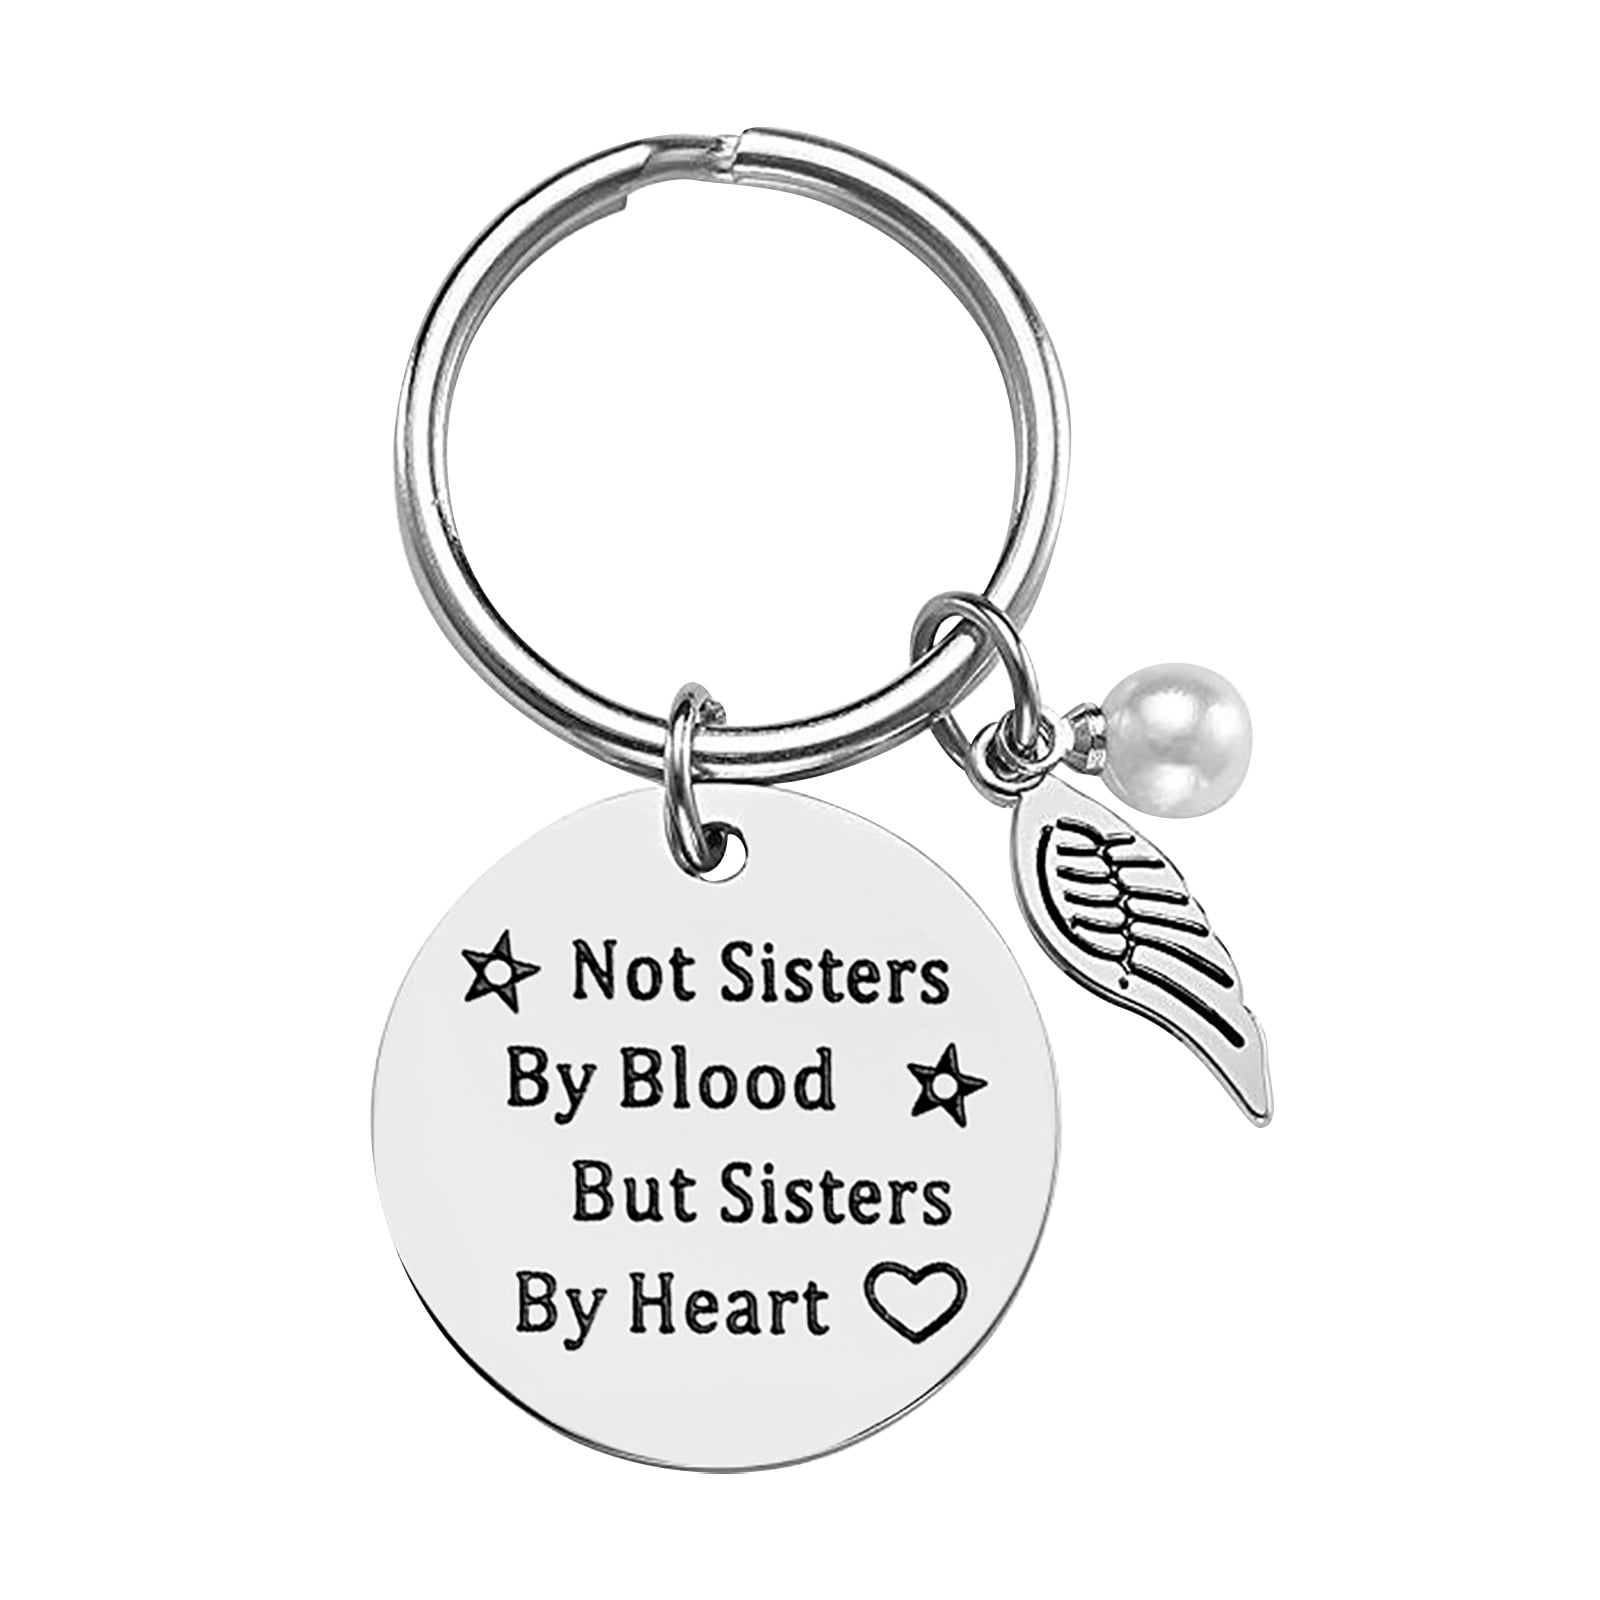 Womens Jewelry Easter Gifts Silver HINK-Home Keychains Fashion Creative Letter Keychain Practical Gift Keyring Portable Jewelry 